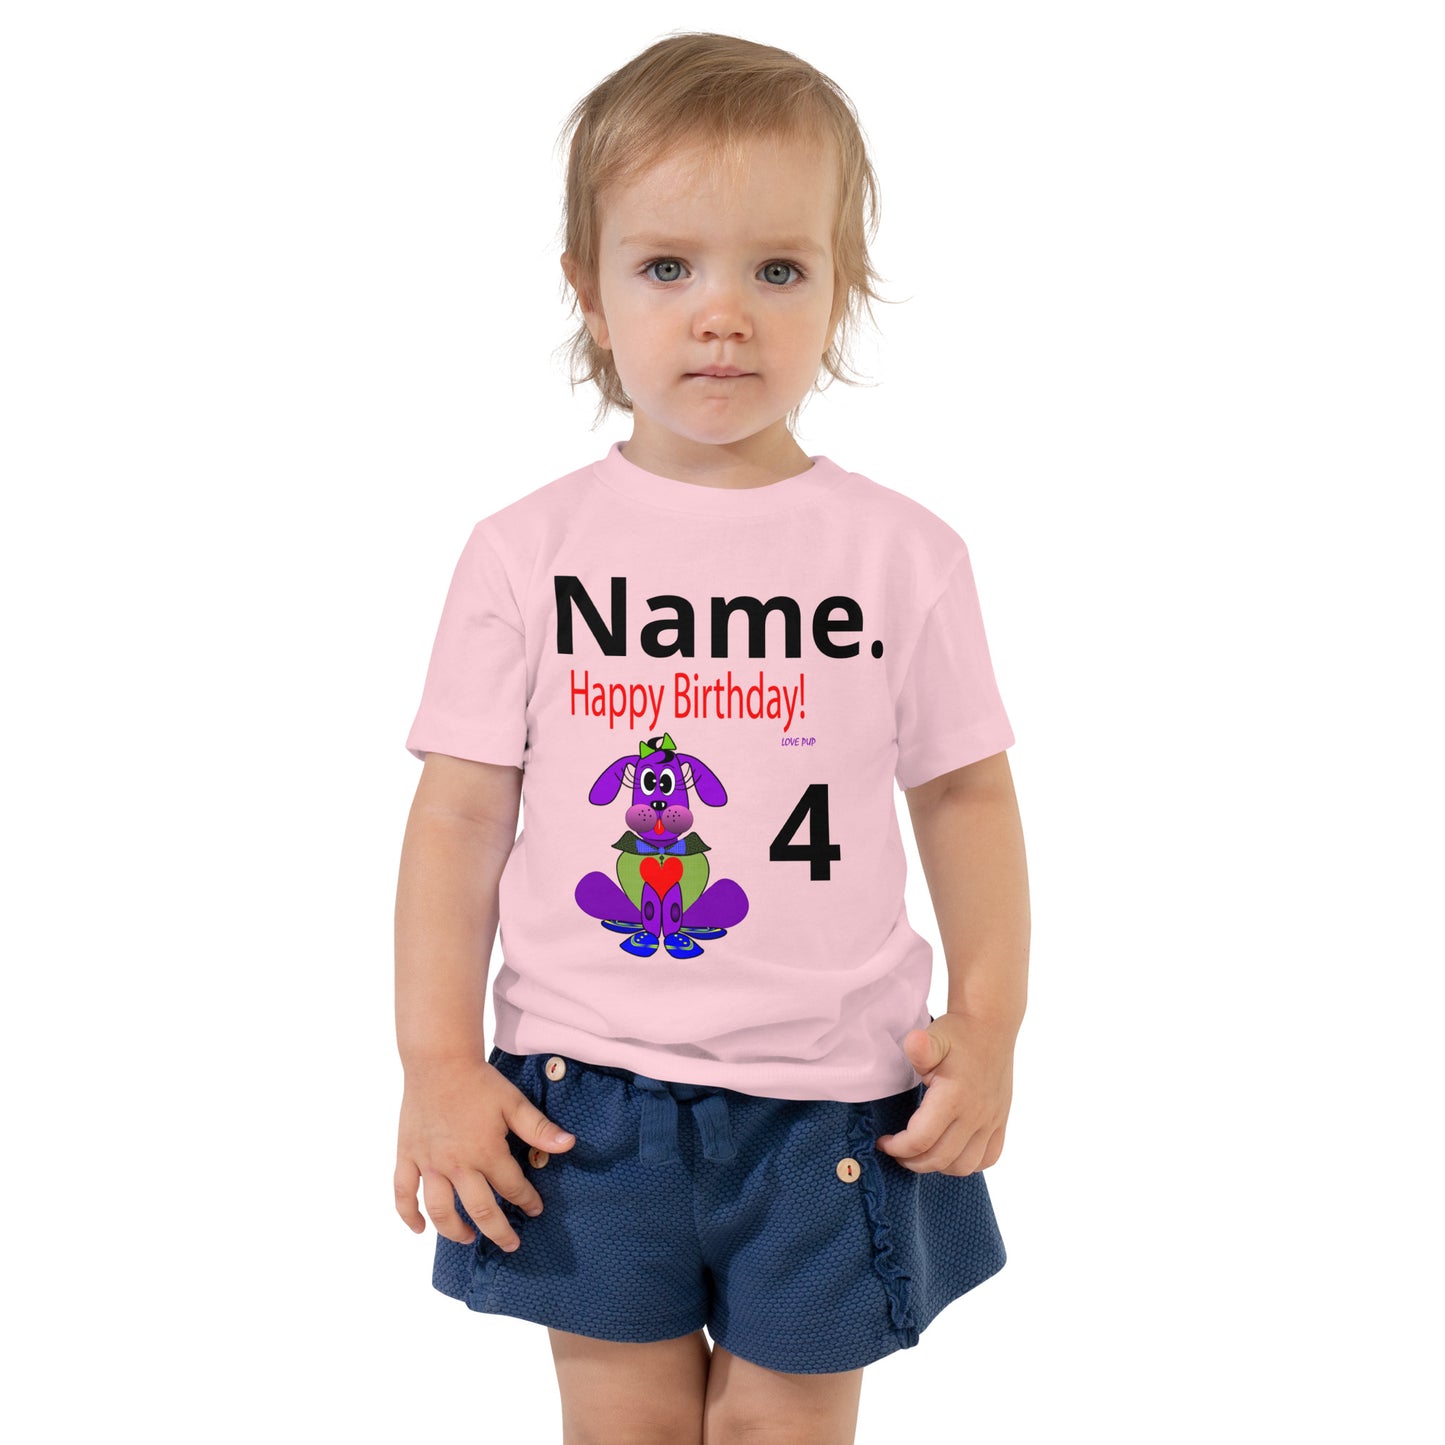 Personalize Love Pup 1 Purple Toddler Tee - Birthday Special! (2T-5T)